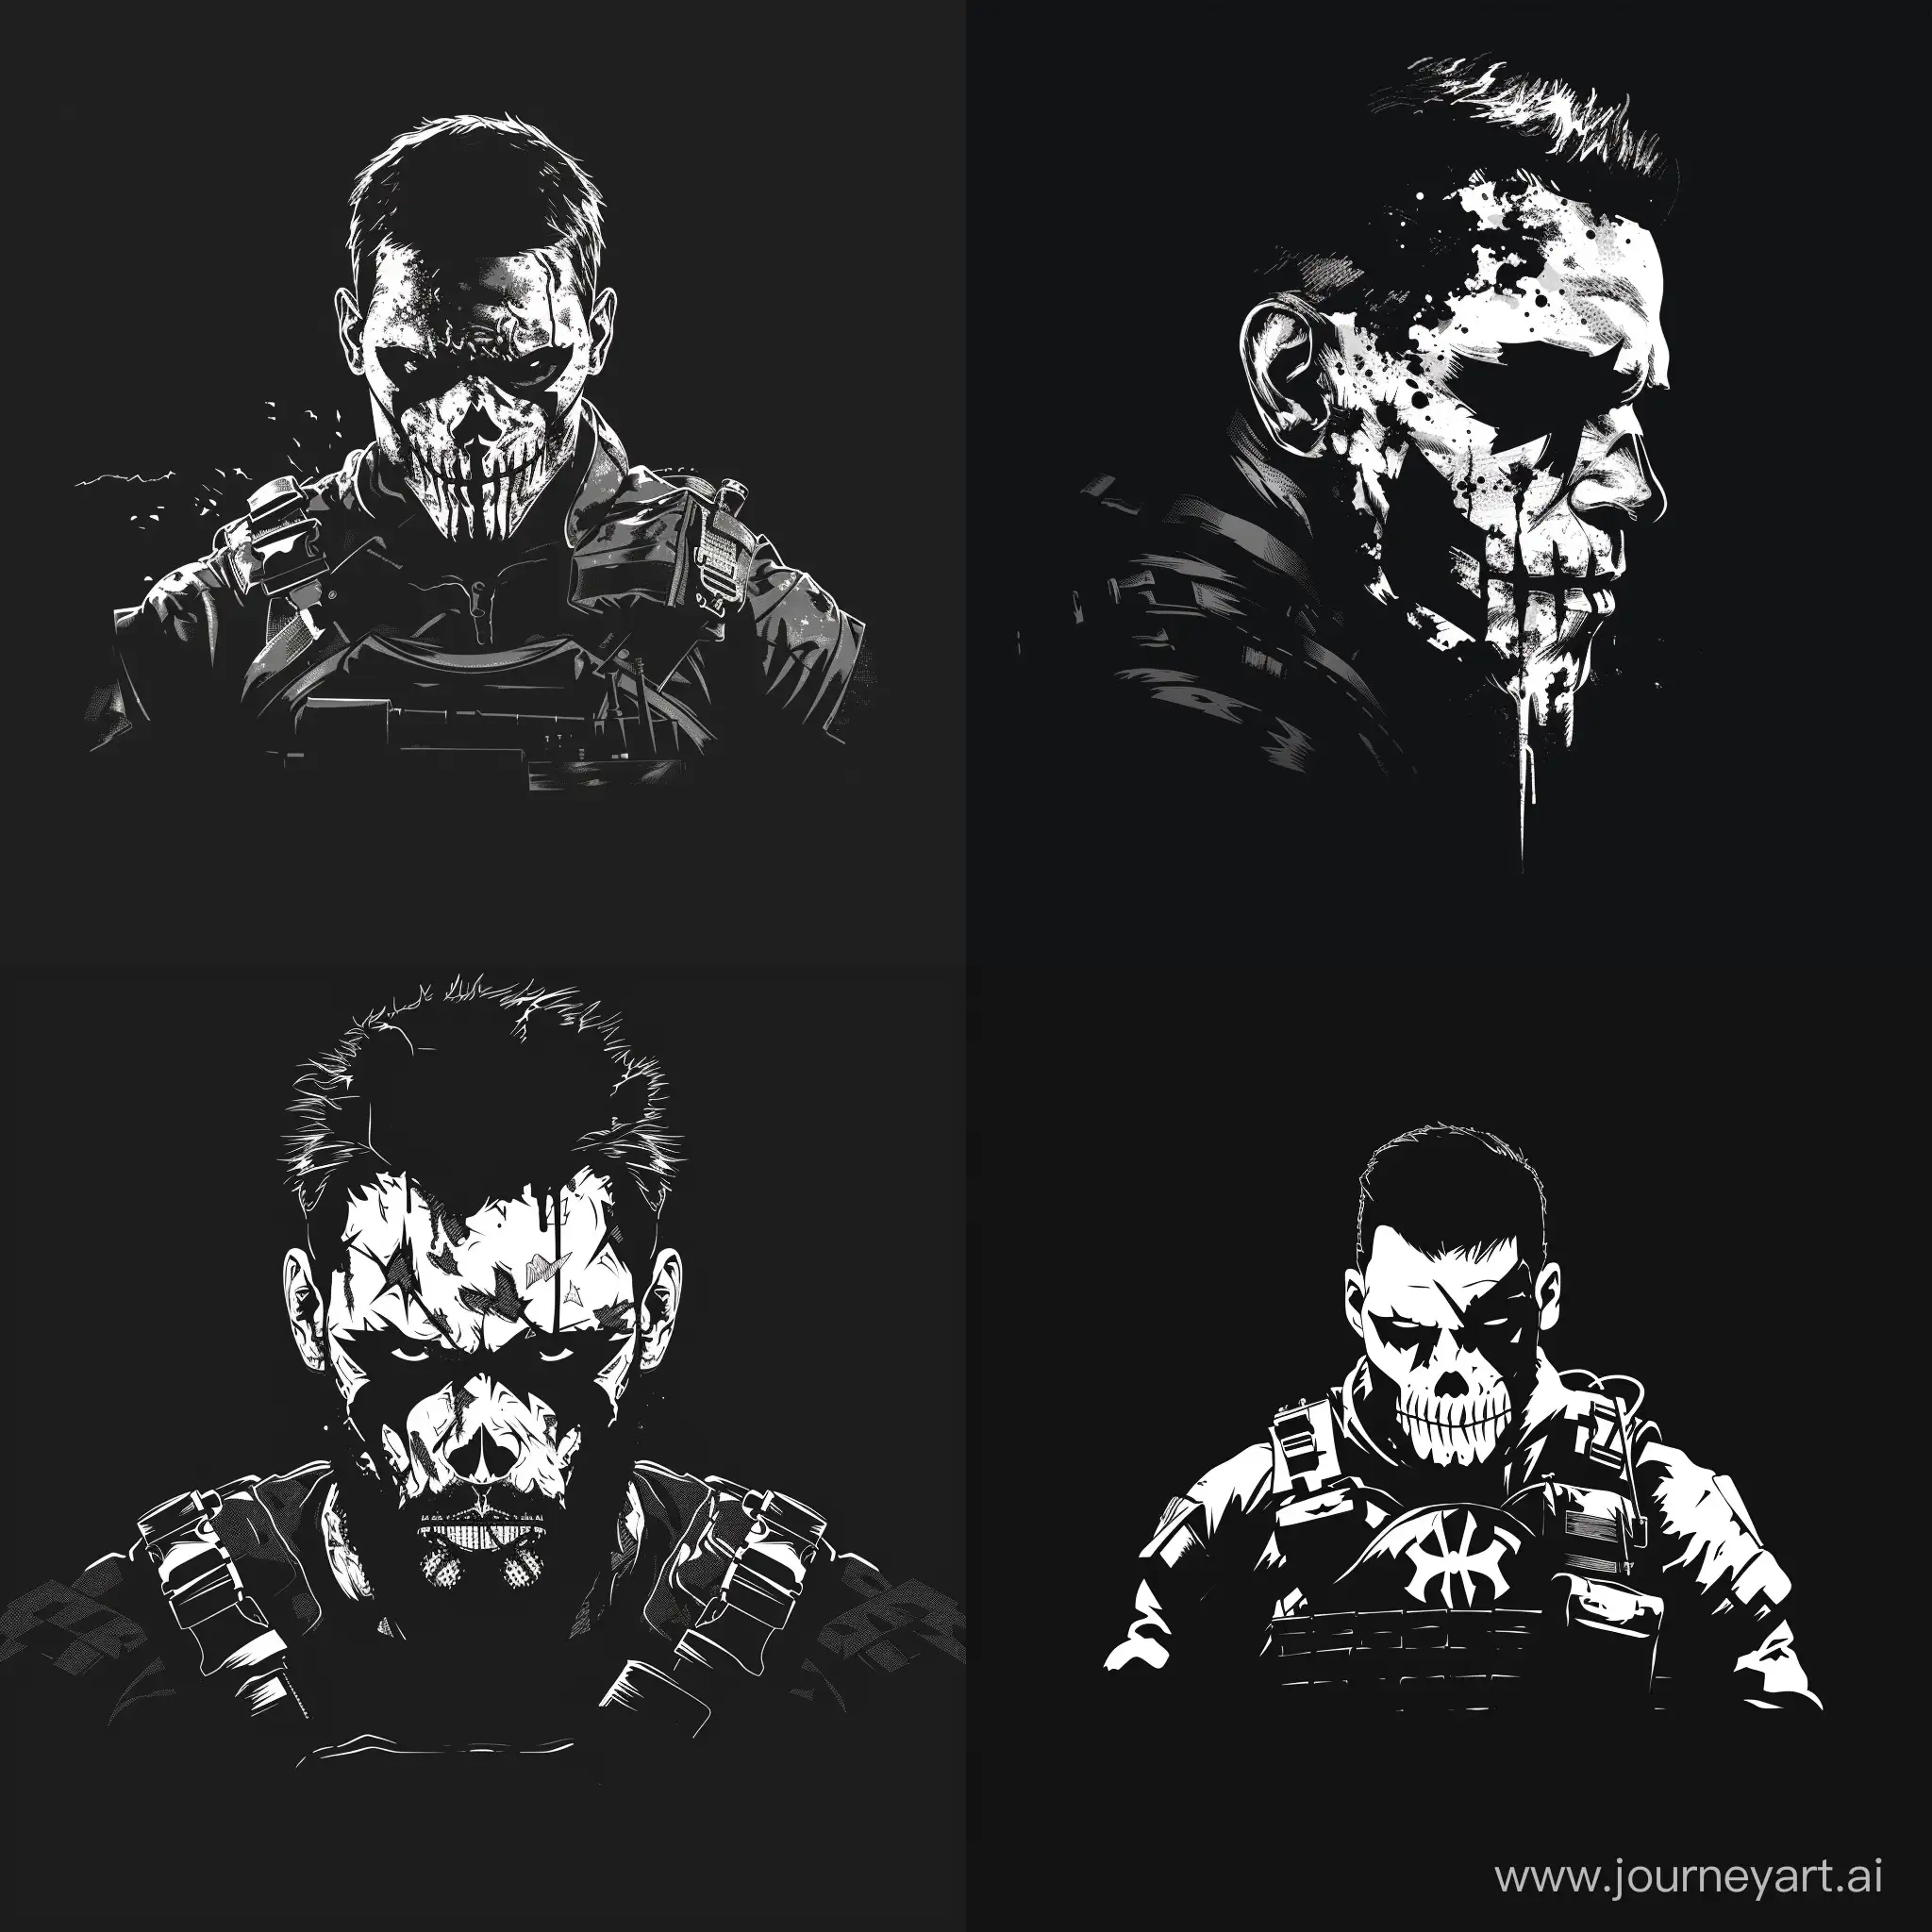 Minimalistic-Logo-Man-with-Crudely-Painted-Punisher-War-Paint-Skull-and-Military-Equipment-on-Black-Background